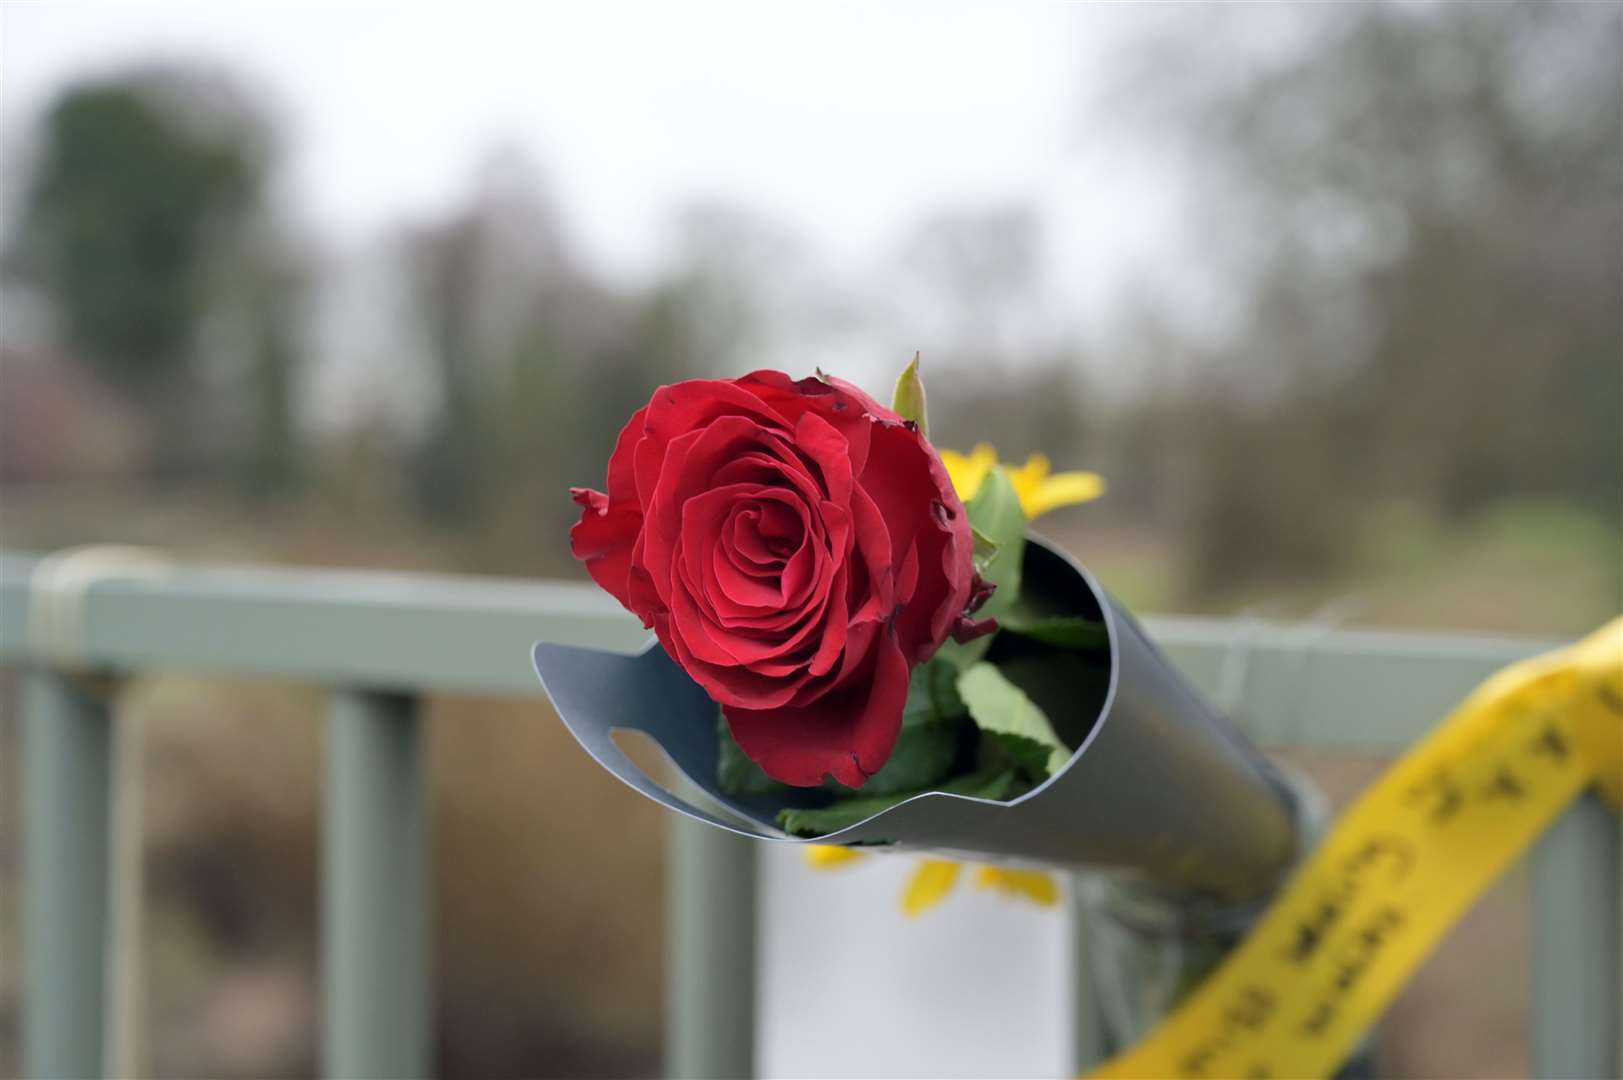 Tributes to Ms Bulley were left at a bridge over the River Wyre (Dave Nelson/PA)